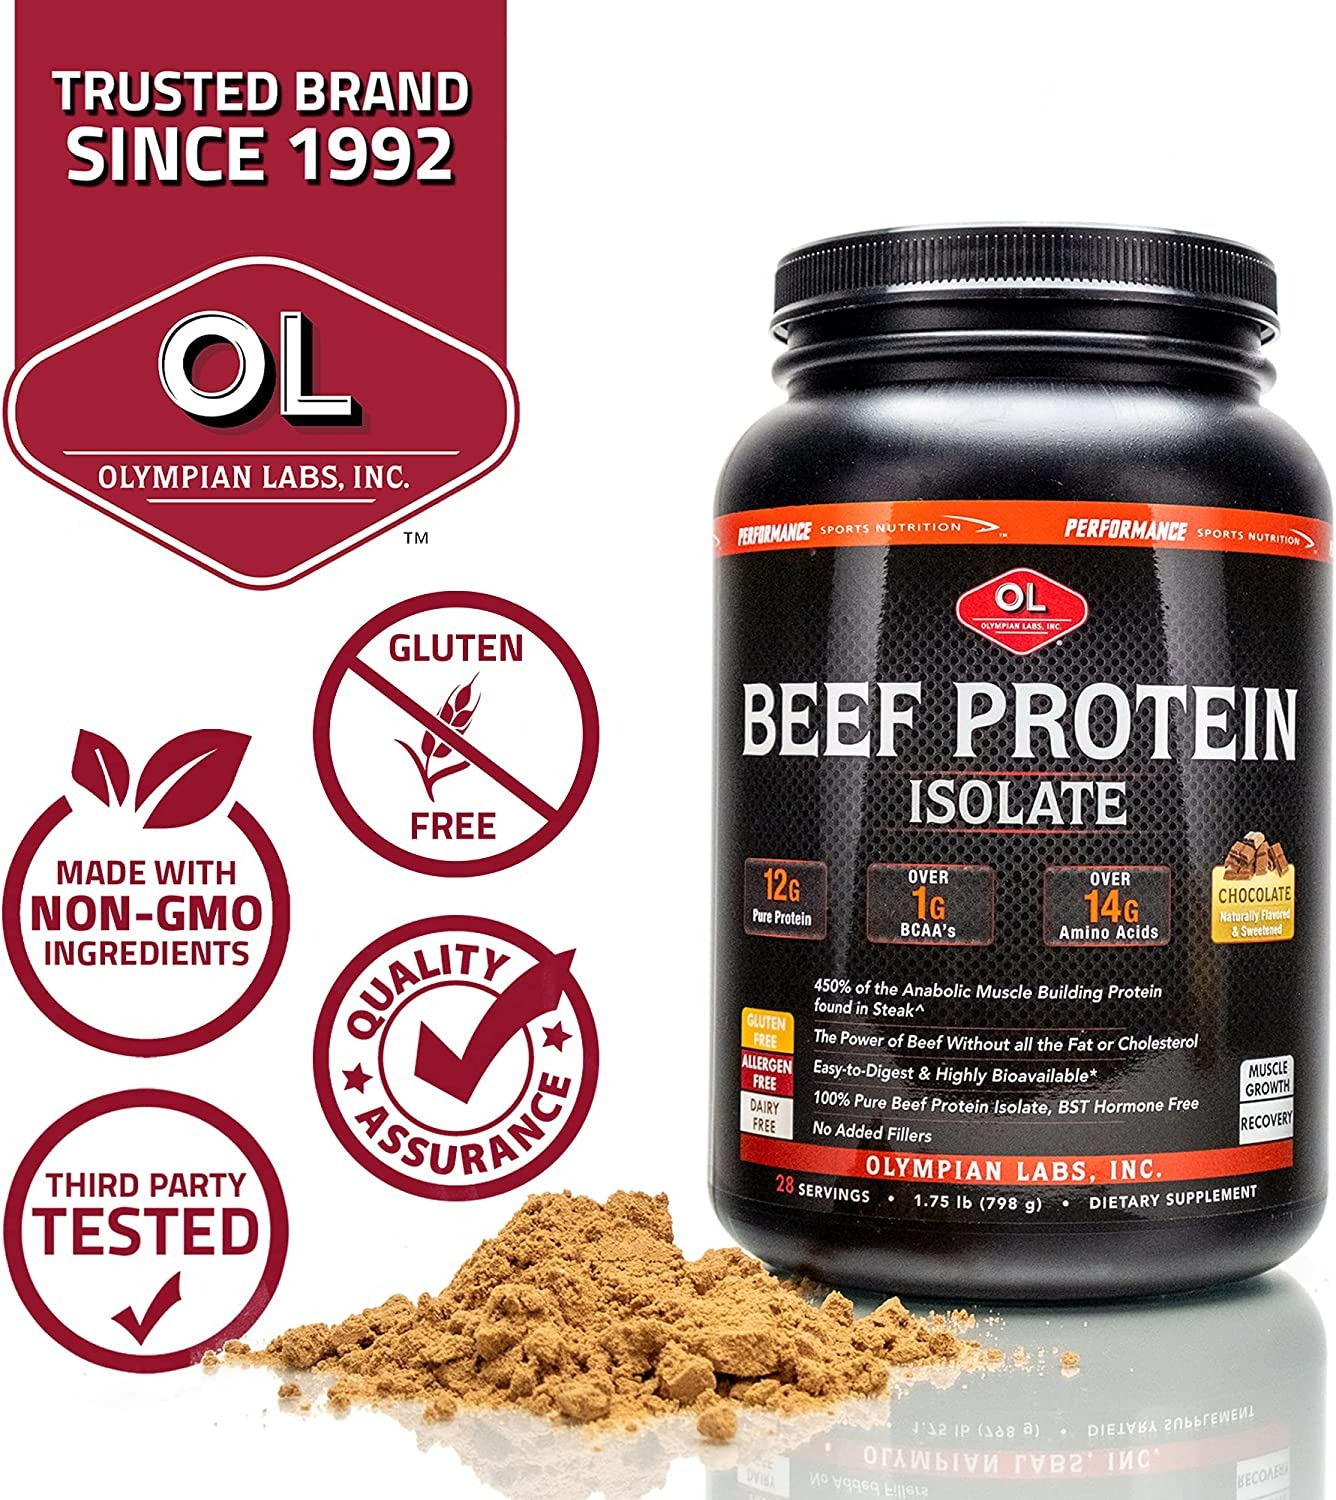 Olympian Labs Beef Protein Isolate - 16 Oz-1